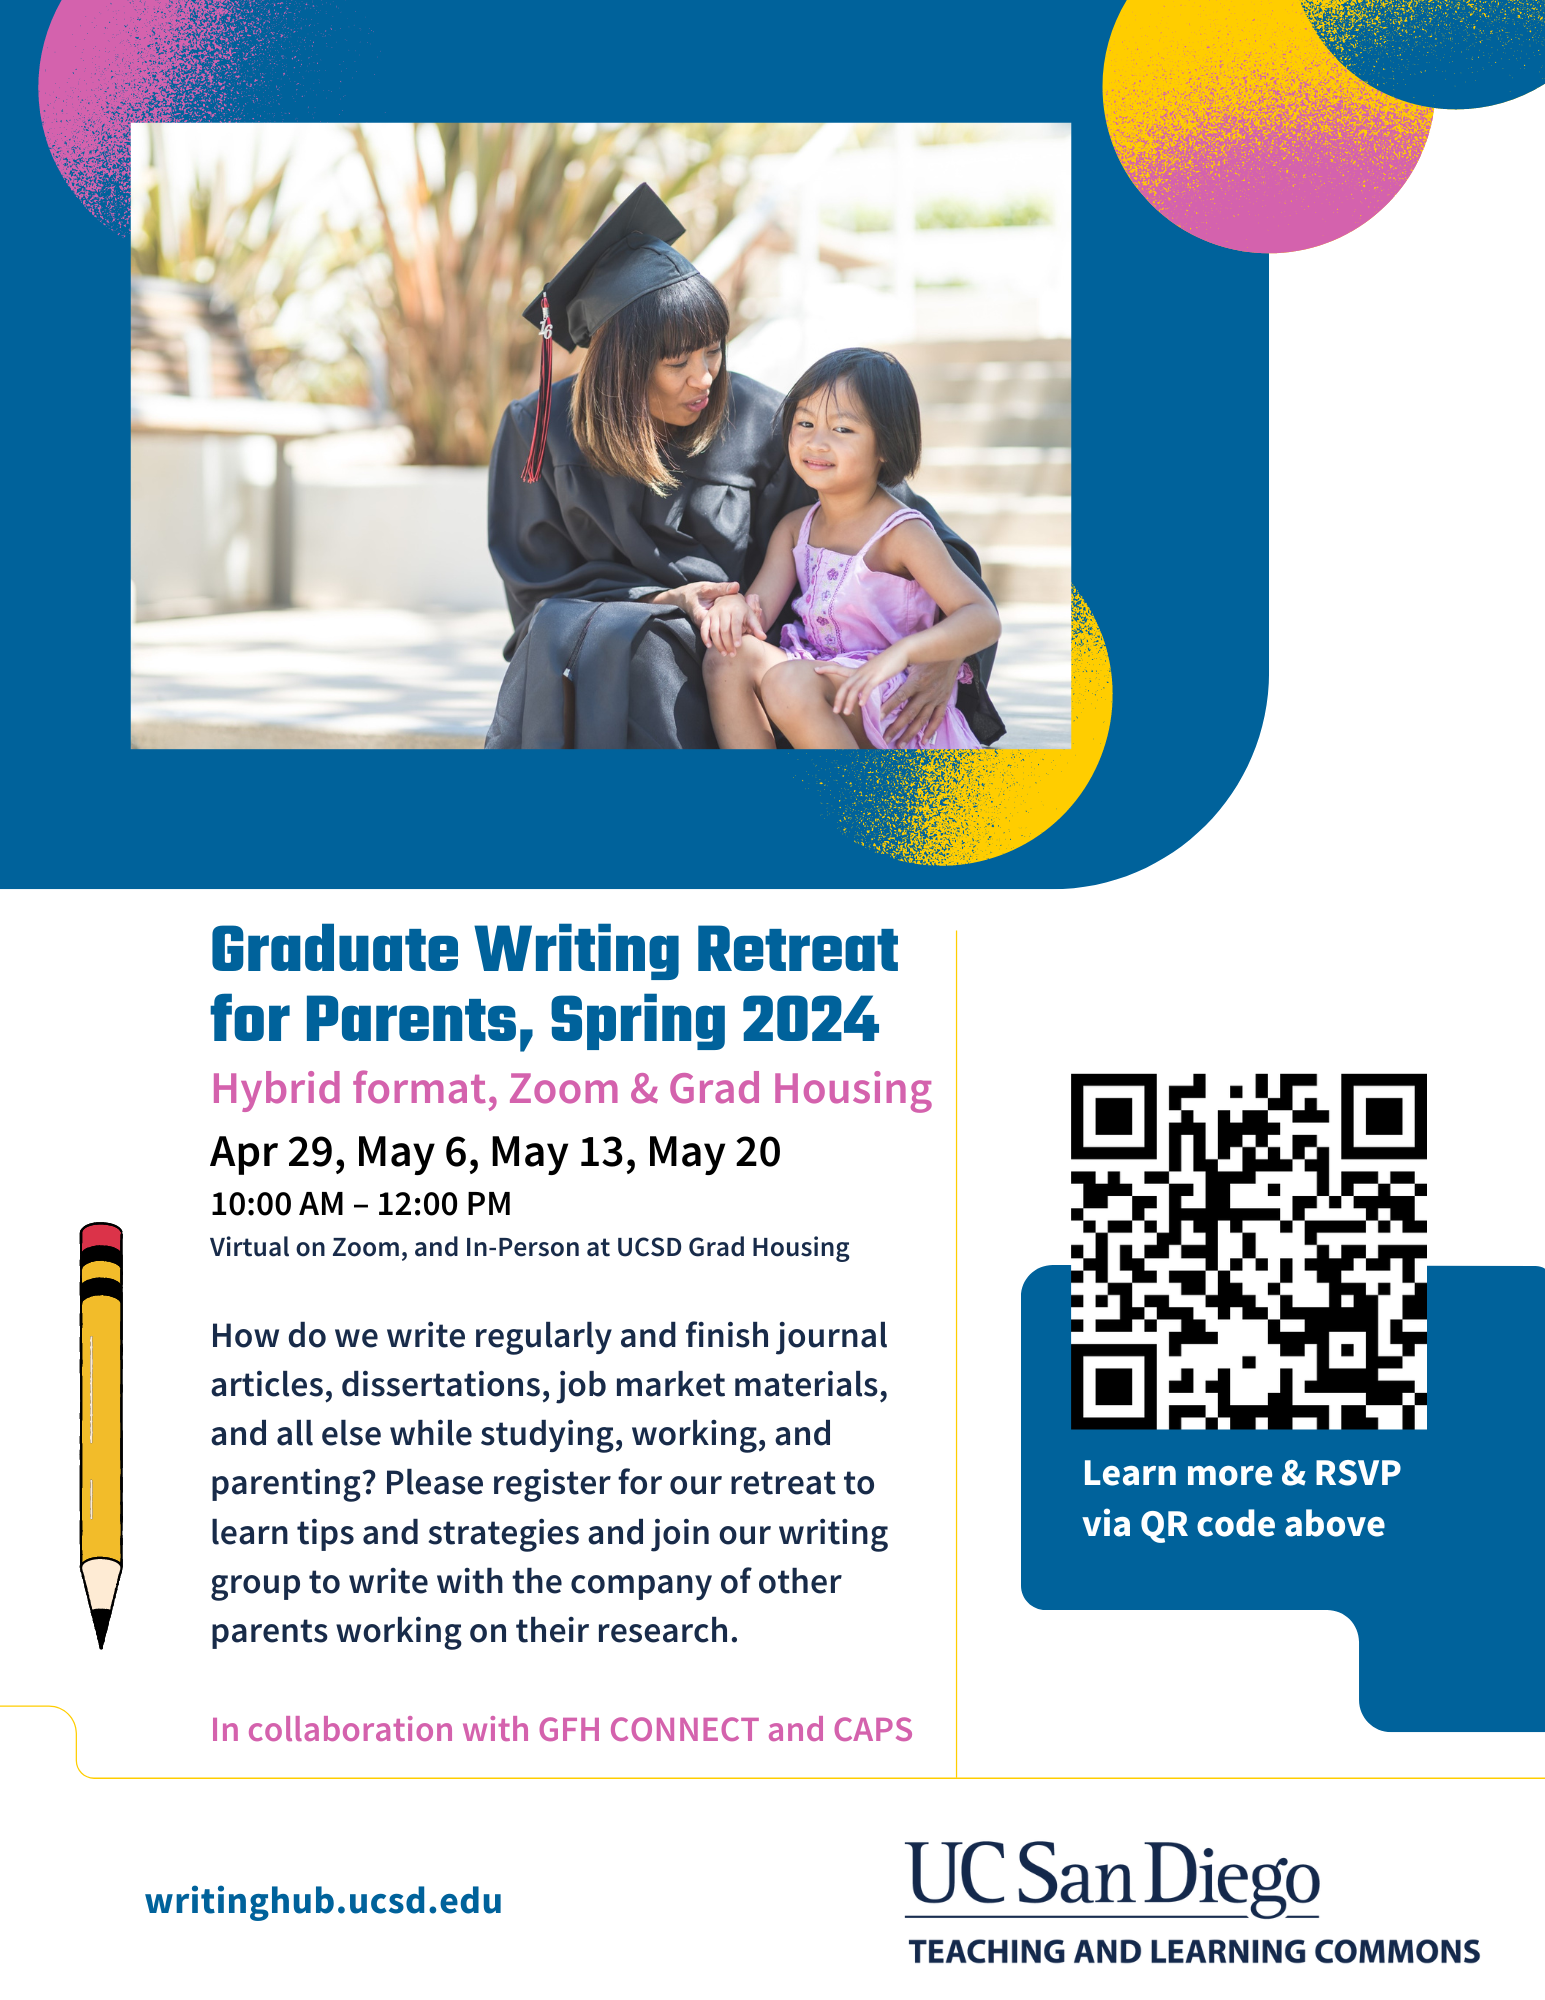 SP24-Writing-Retreat-for-Parents-1.png